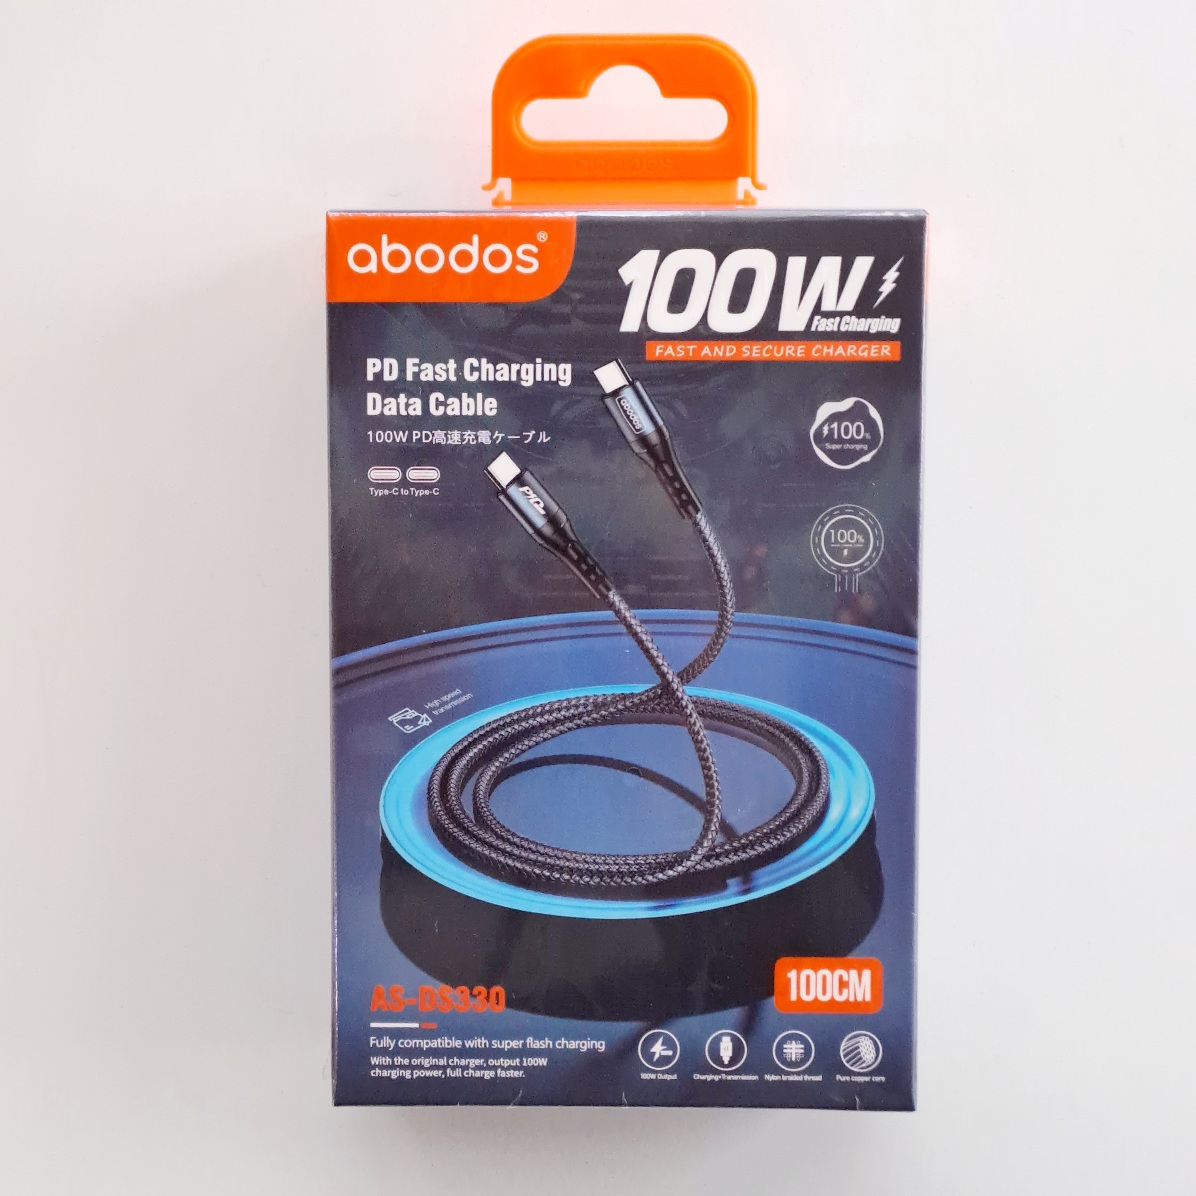 AS-DS330 abodos PD 100W Type C to Type C Data Cable 1m Black